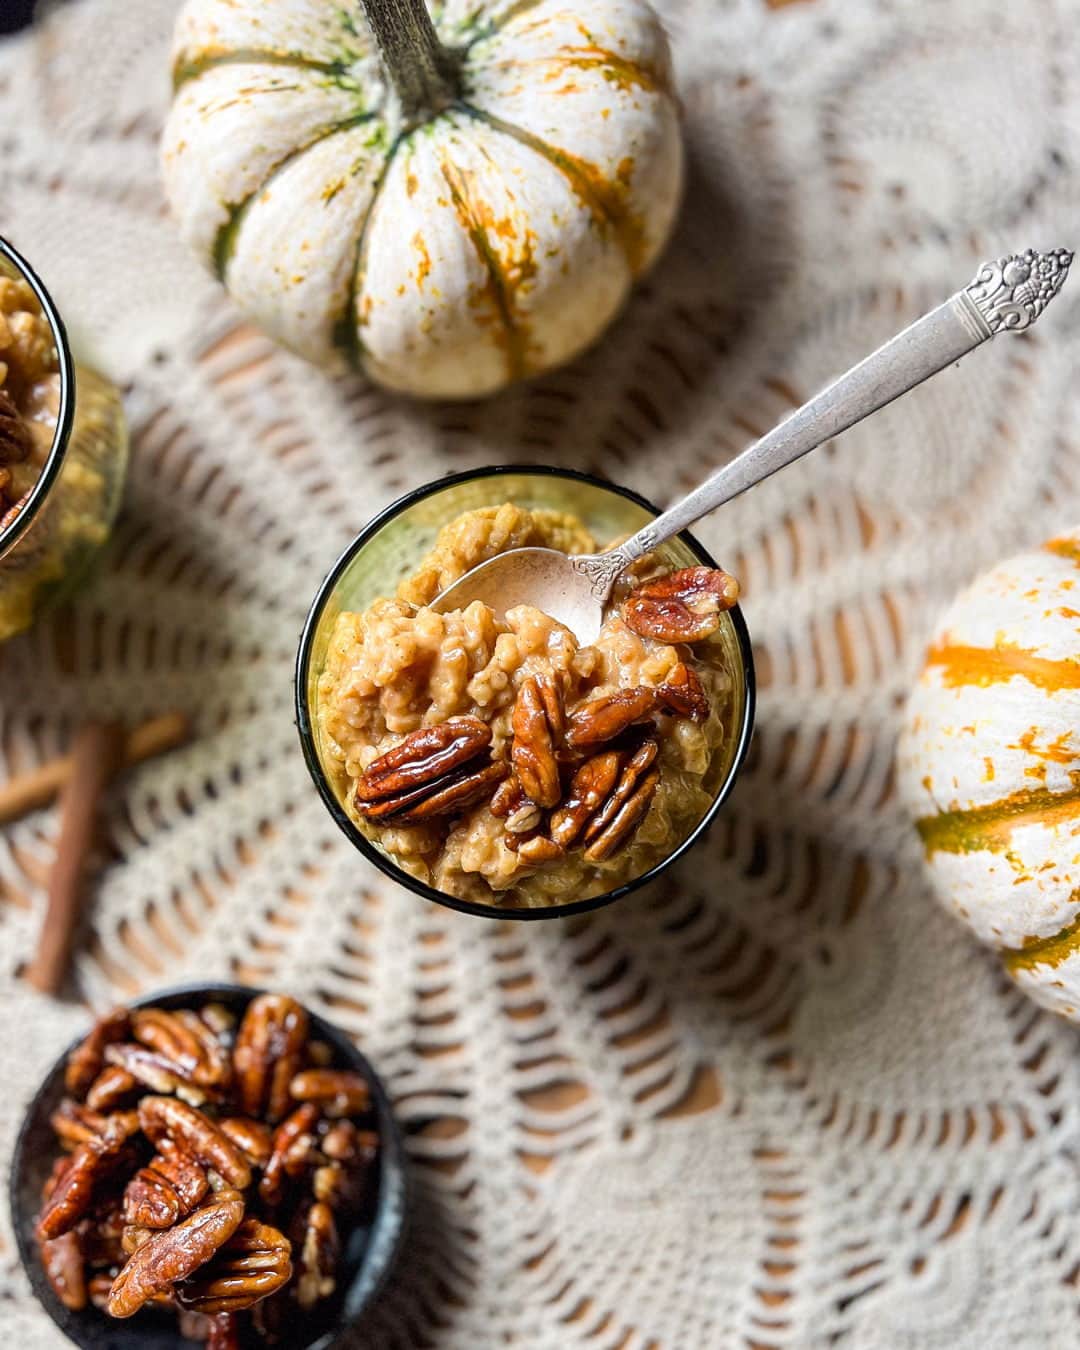 Food Republicさんのインスタグラム写真 - (Food RepublicInstagram)「Vegan Pumpkin Pecan Rice Pudding Recipe   This nutty, warmly spiced take on creamy rice pudding is completely plant-based, thanks to almond milk and pumpkin puree.  Recipe developed in collaboration with @norrtable   Prep Time: 10 minutes  Cook Time: 30 minutes  Servings: 8 servings  Ingredients: - 4 cups unsweetened almond milk - 1 cup short-grain Arborio rice - ¾ cup pure maple syrup, divided - 1 vanilla bean, split lengthwise - 1 ¼ teaspoons sea salt, divided - ¾ cup pumpkin puree - 1 teaspoon ground cinnamon - ¼ teaspoon ground cardamom - ¼ teaspoon ground nutmeg - ¼ teaspoon ground cloves - 1 cup raw pecans  Directions: 1. In a large heavy pot, bring the almond milk, rice, ½ cup maple syrup, vanilla bean, and 1 teaspoon sea salt to a boil.  2. Reduce heat to low, cover, and simmer for 20 minutes.  3. Add the pumpkin and spices to the pot, stirring gently to combine.  4. Bring the pudding back to a gentle simmer, uncovered, and cook over low heat for 5 minutes.  5. While the pudding finishes cooking, combine the pecans, remaining ¼ cup maple syrup, and remaining ¼ teaspoon sea salt in a small nonstick skillet over medium heat.  6. When the maple syrup starts to bubble, reduce the heat to low and simmer for about 5 minutes, stirring occasionally, until thickened but still glossy.  7. Remove pecans from heat and transfer to a parchment-lined surface in a single layer to cool.  8. Remove the vanilla bean from the rice pudding, scraping out any remaining seeds back into the pot and giving it a final stir.  9. Serve the rice pudding warm and topped with glazed pecans.  -  #dessert #dessertable #desserttime #dessertrecipe #dessertrecipes #sweet #sugar #delicious #dessertporn #dessertbae #dessertlover #dessertpic #dessertoftheday #dessertgram #dessertbar #dessertstagram #dessertsofinstagram #dessertbox #dessertmasters #dessertheaven #dessertgoals #dessertblogger #sweettooth #yum #enjoy #eatup #yummy」11月14日 0時56分 - foodrepublic